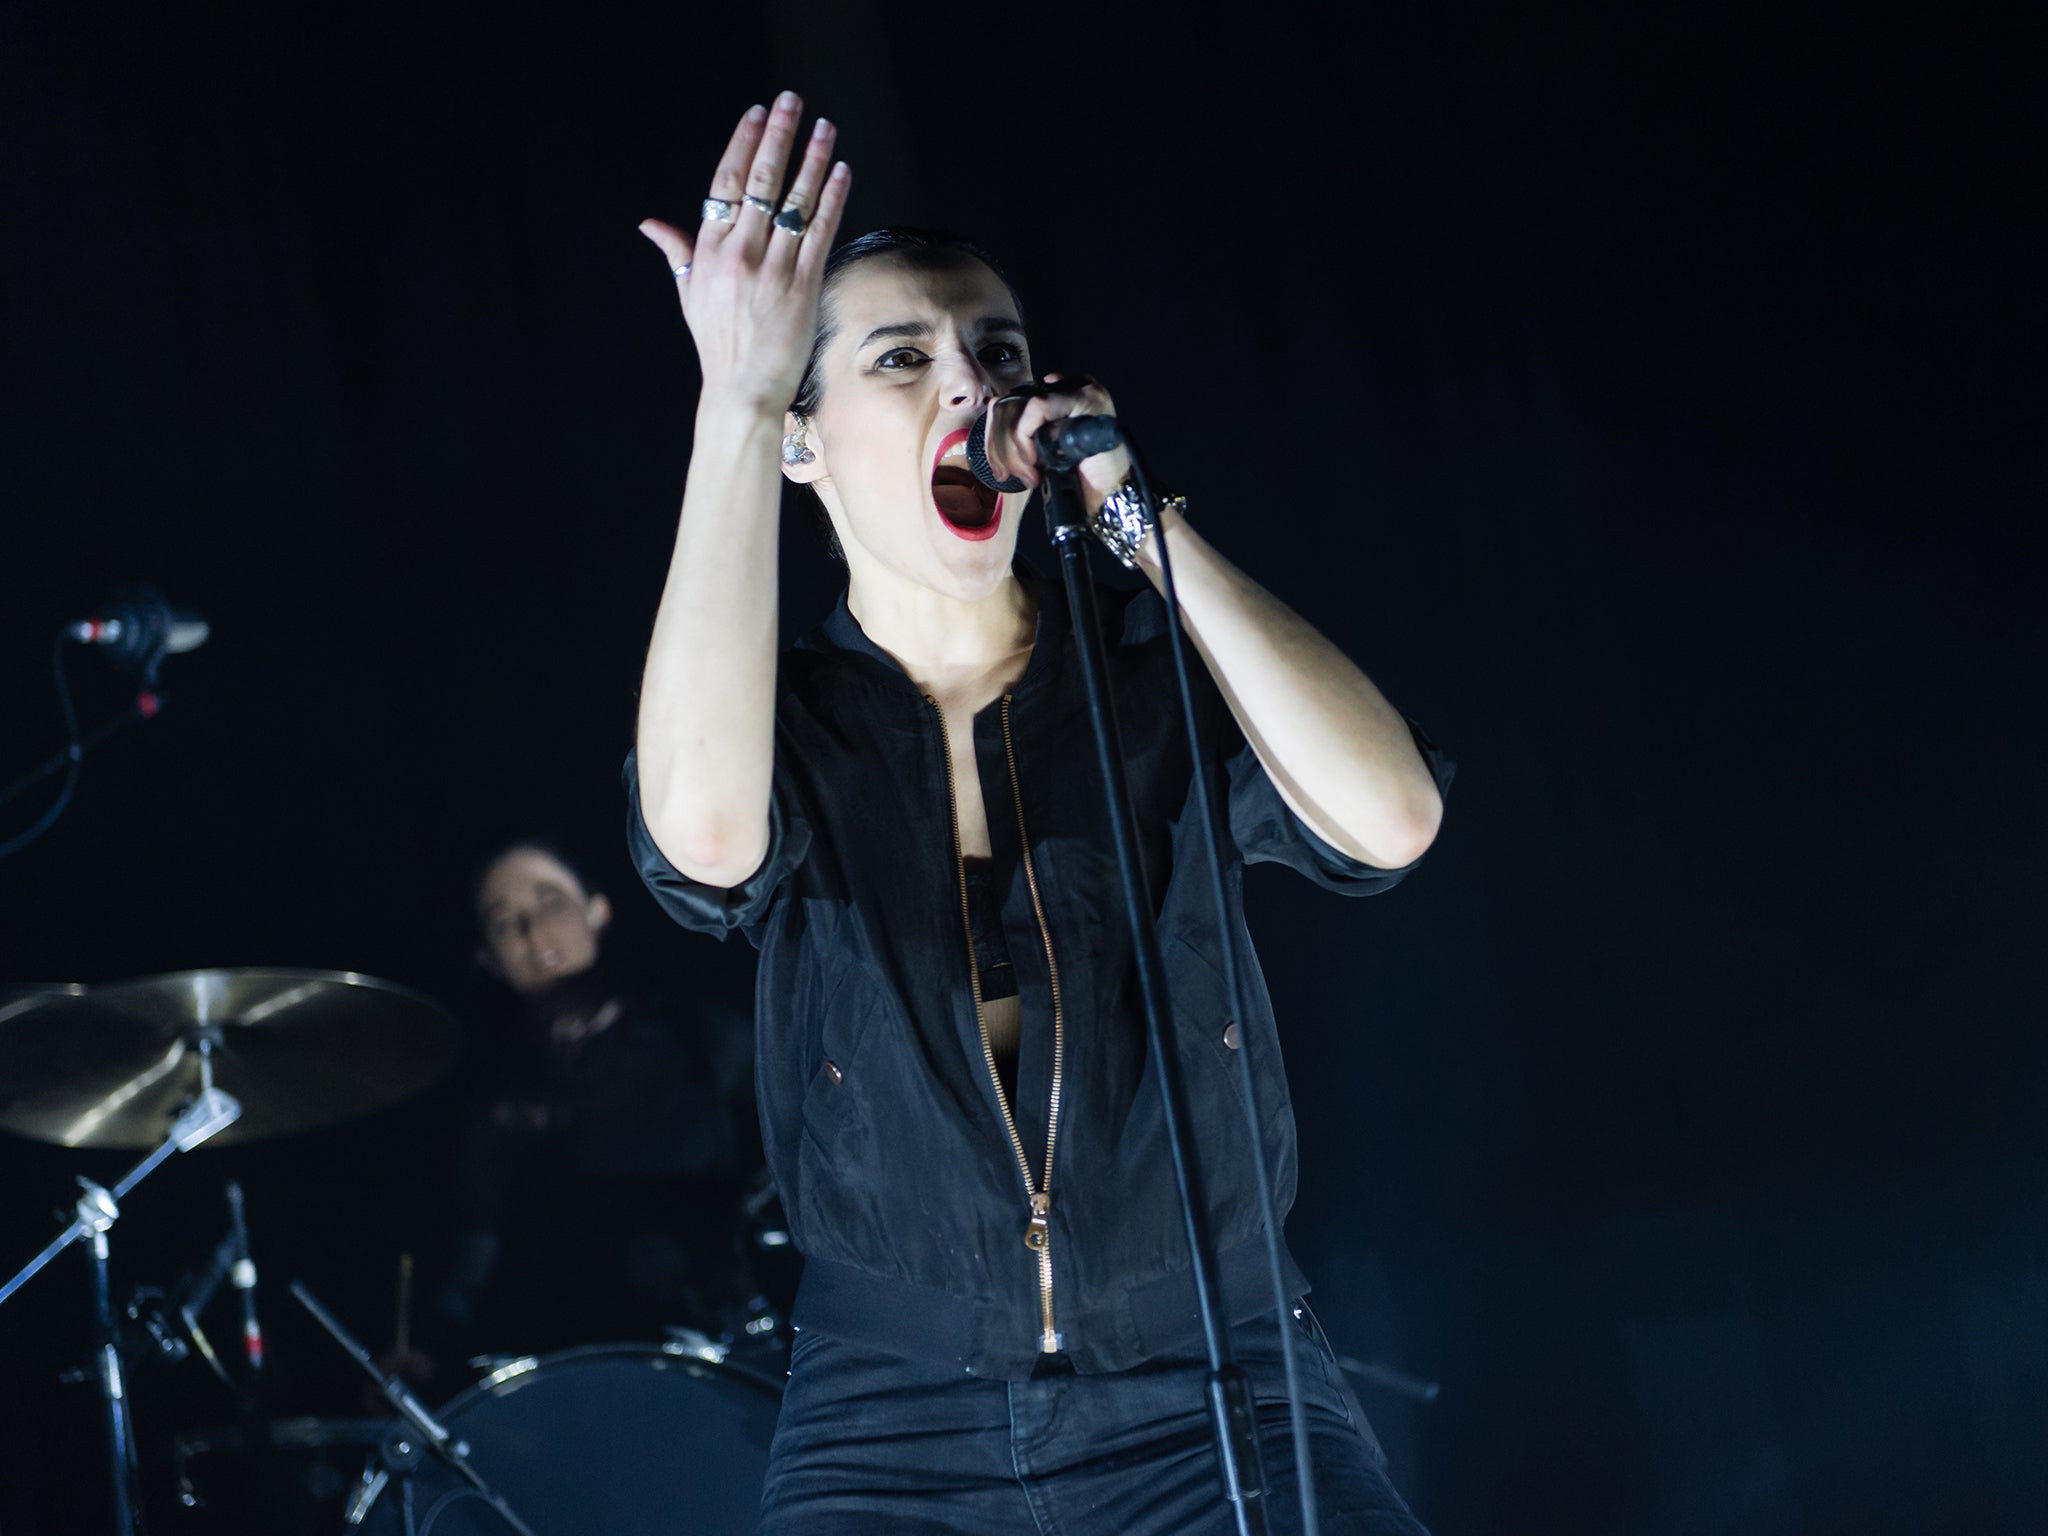 Savages frontwoman Jehnny Beth channels Patti Smith's commanding presence